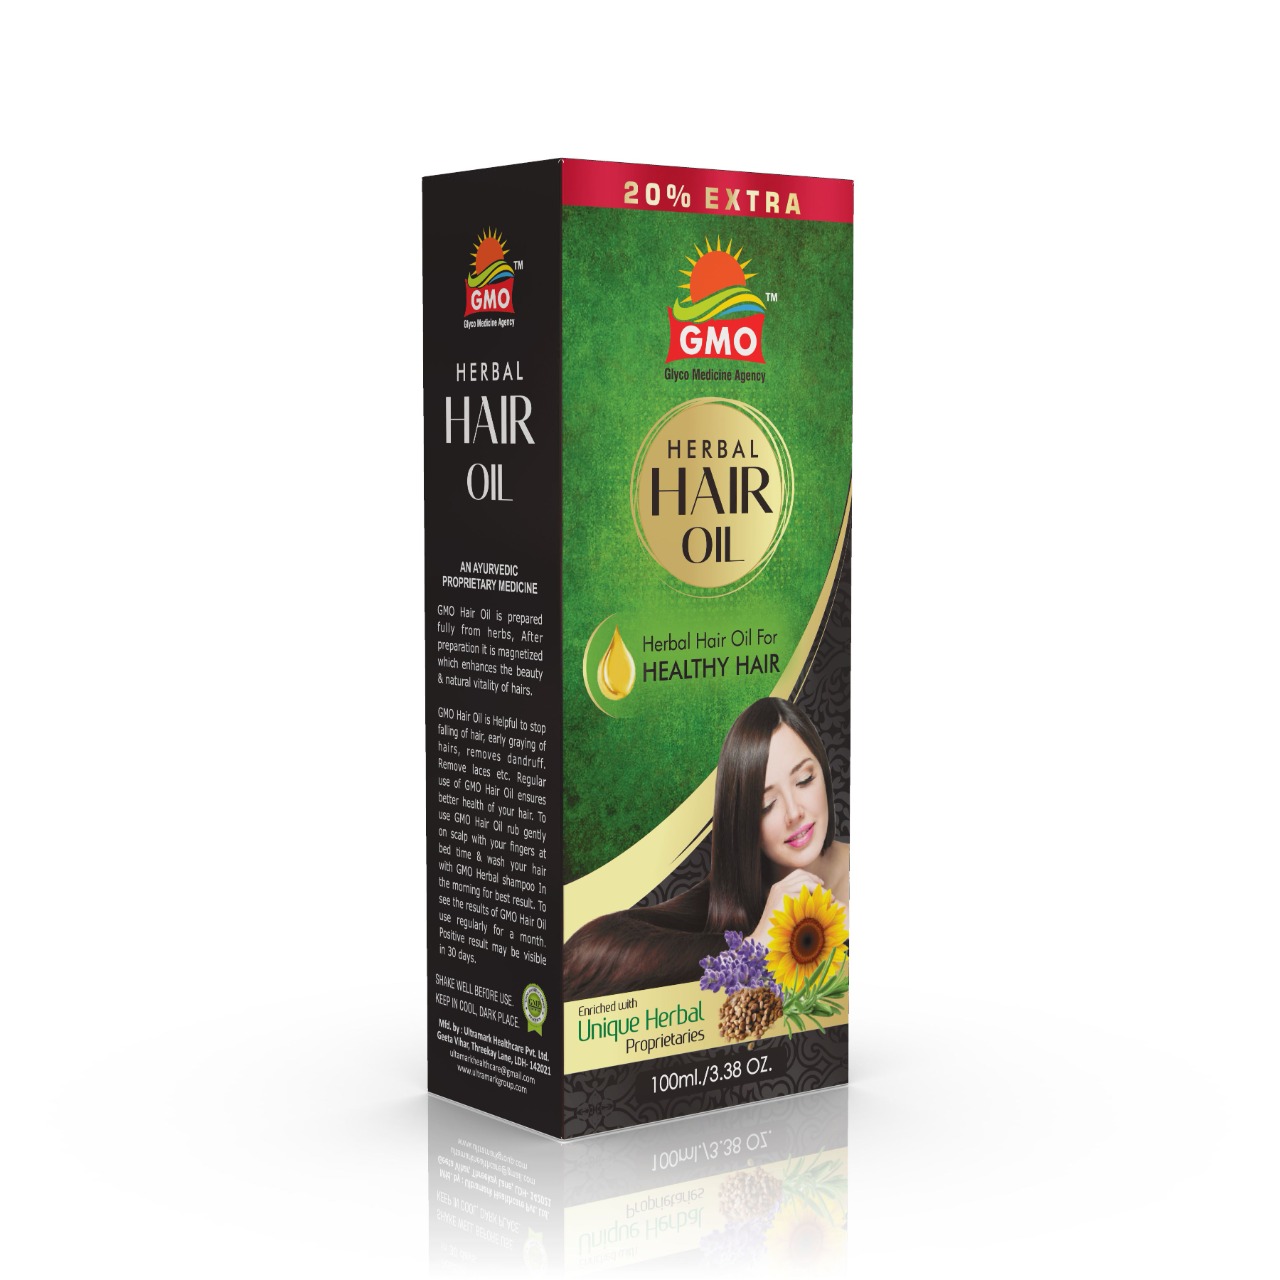 GMO herbal hair oil manufacturer by mmb healthcare